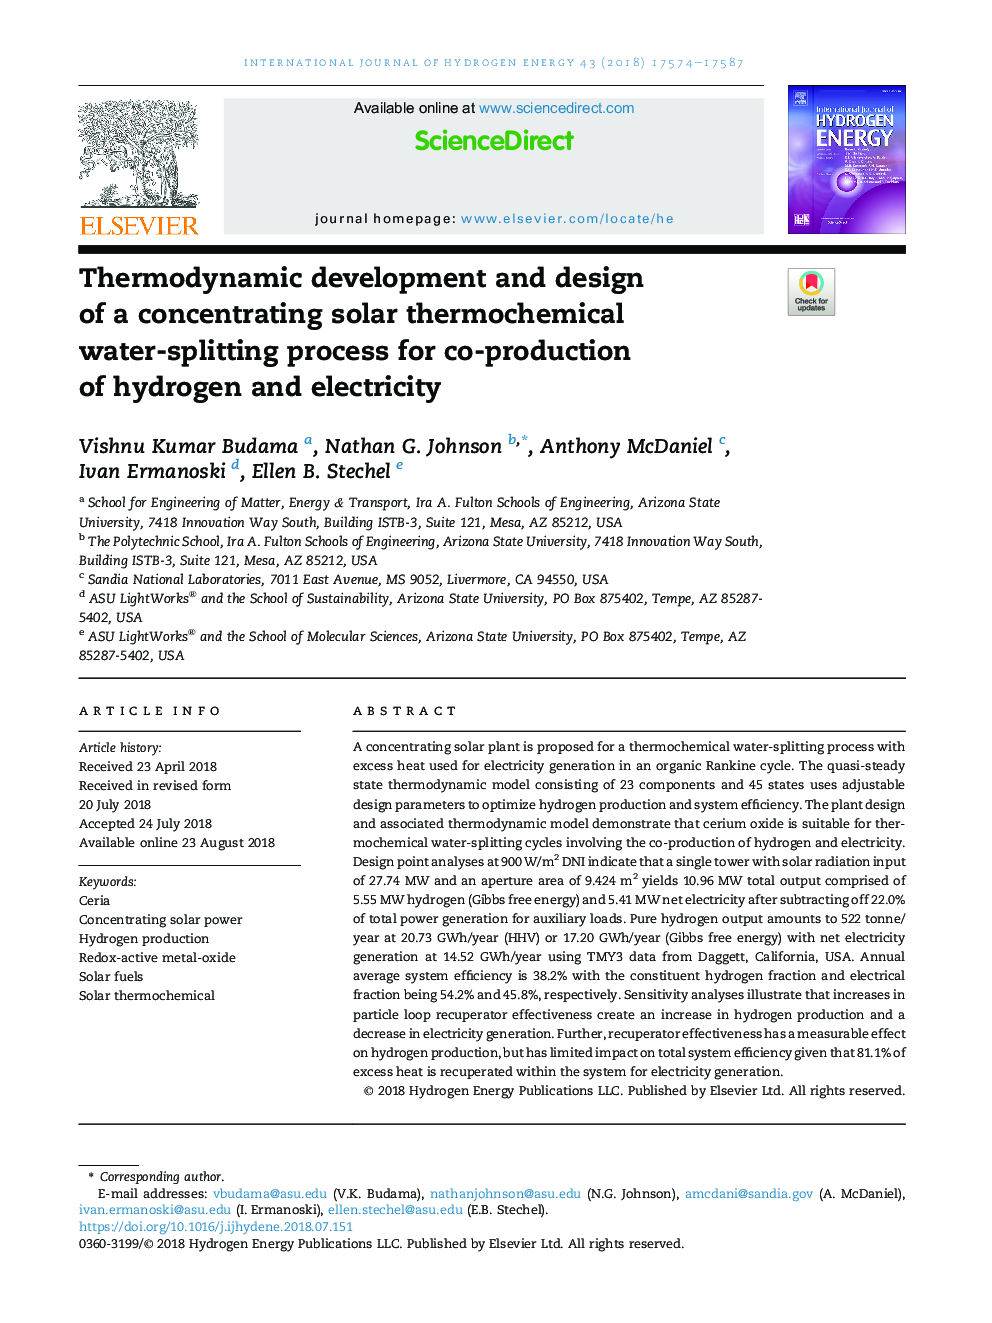 Thermodynamic development and design ofÂ aÂ concentrating solar thermochemical water-splitting process for co-production ofÂ hydrogen and electricity